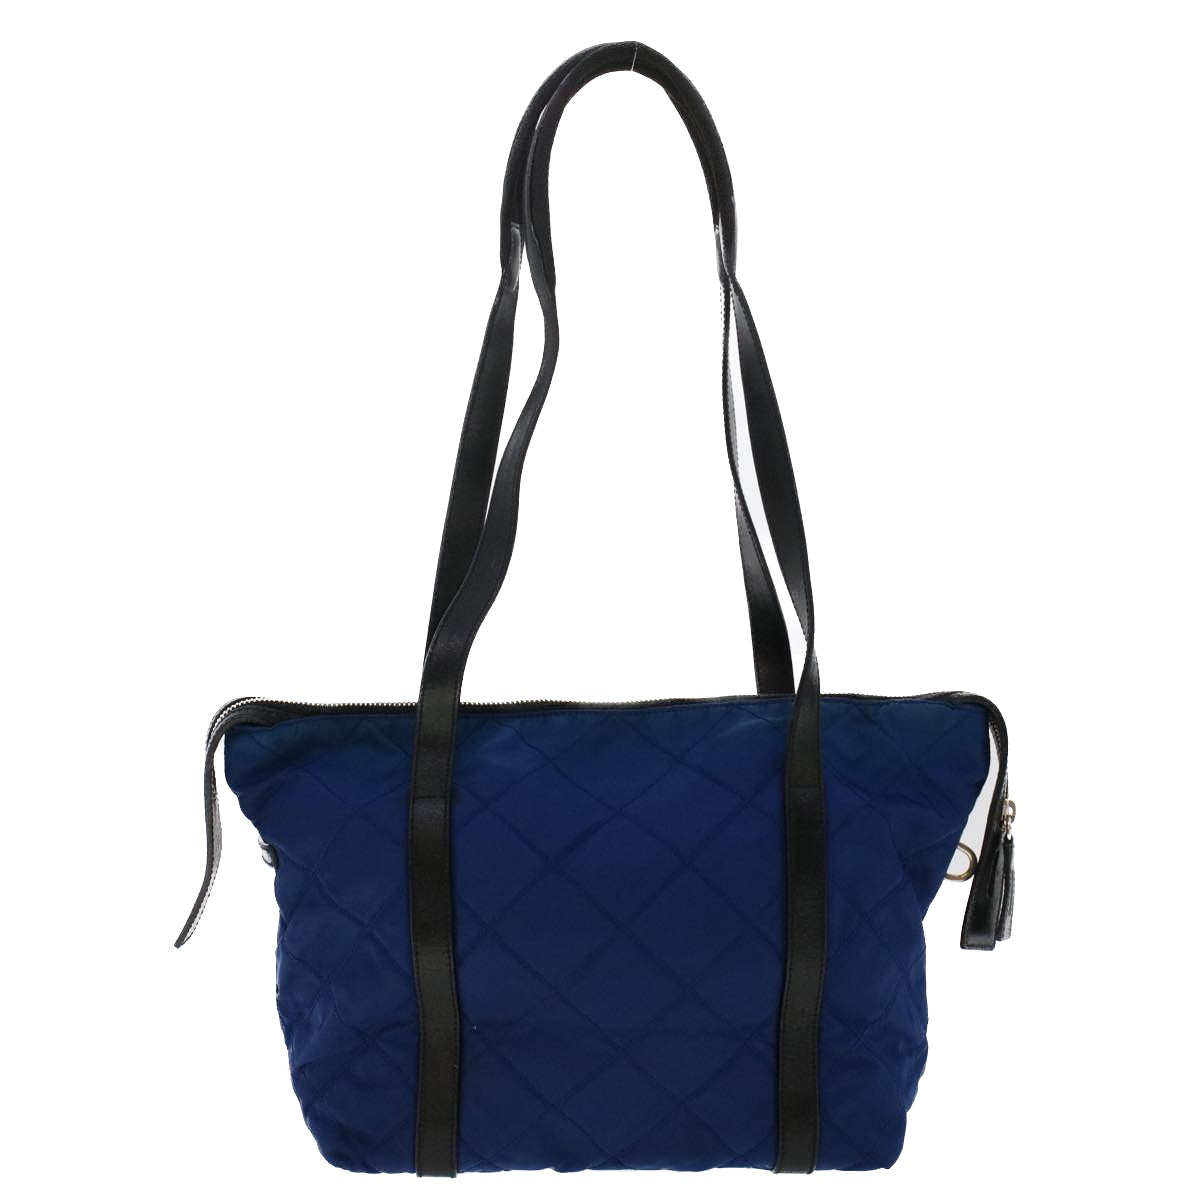 PRADA Quilted Shoulder Bag Nylon Leather Navy Auth 47100 - 0